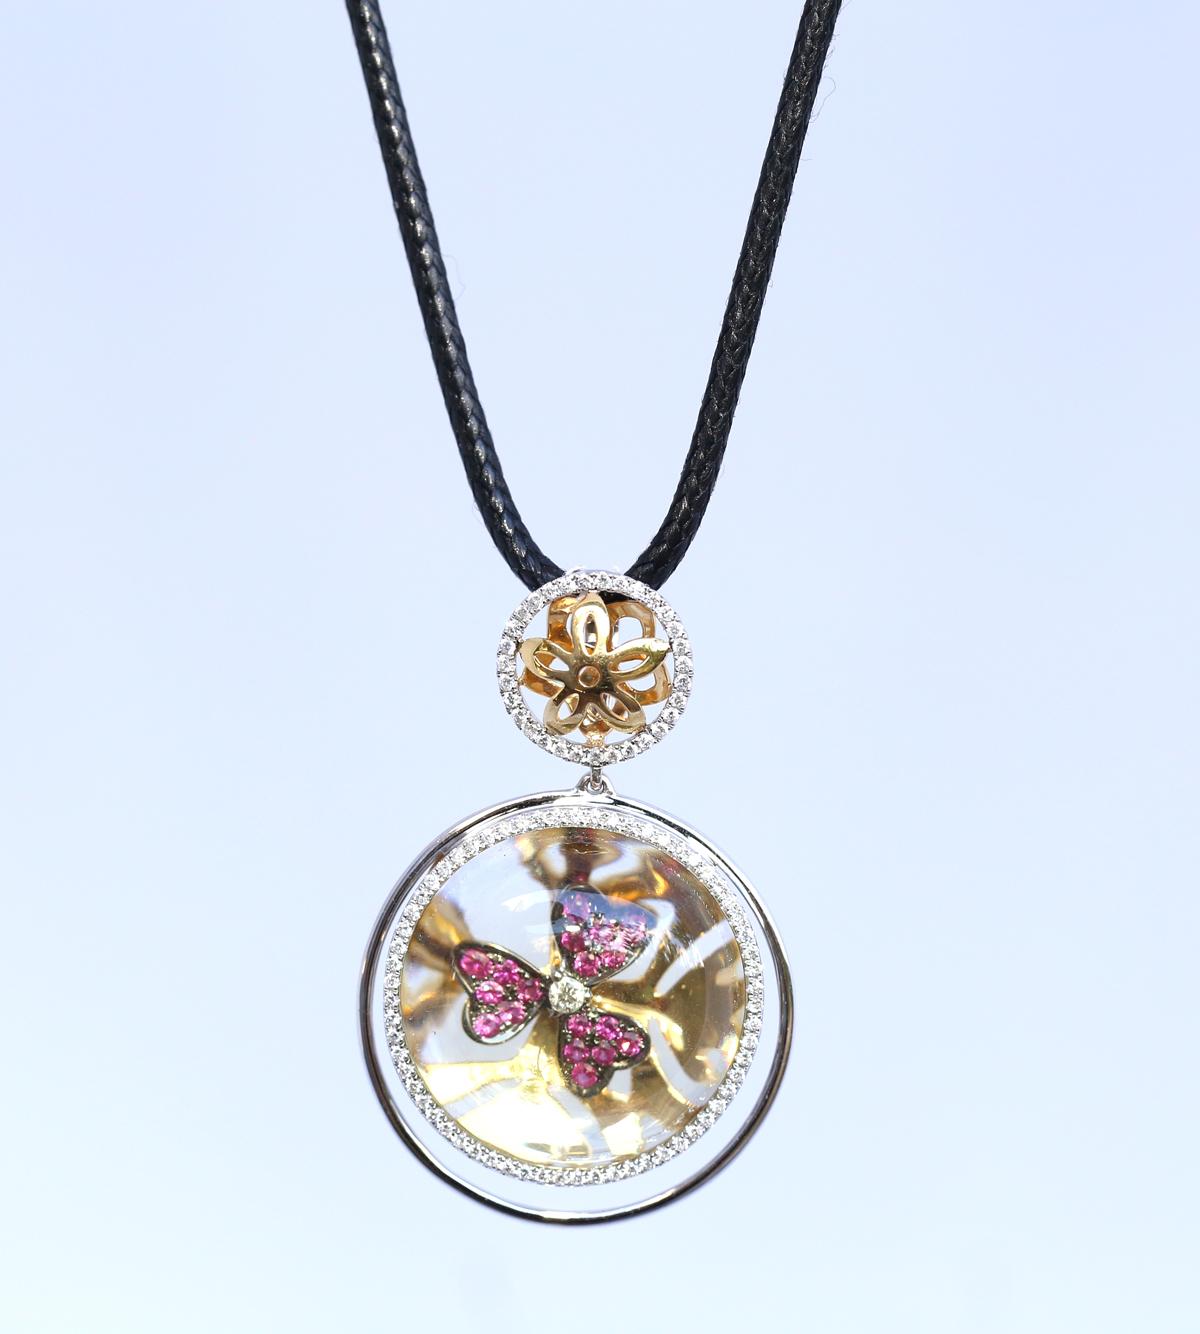 Pink Sapphire flower locked in the Yellow Quartz Gold Pendant. It looks very unusual and very 70es. The quartz has a lens magnifying effect, the flower inside looks like a relic stuck in amber, but it is all hand made by an excellent jeweler.
Not an